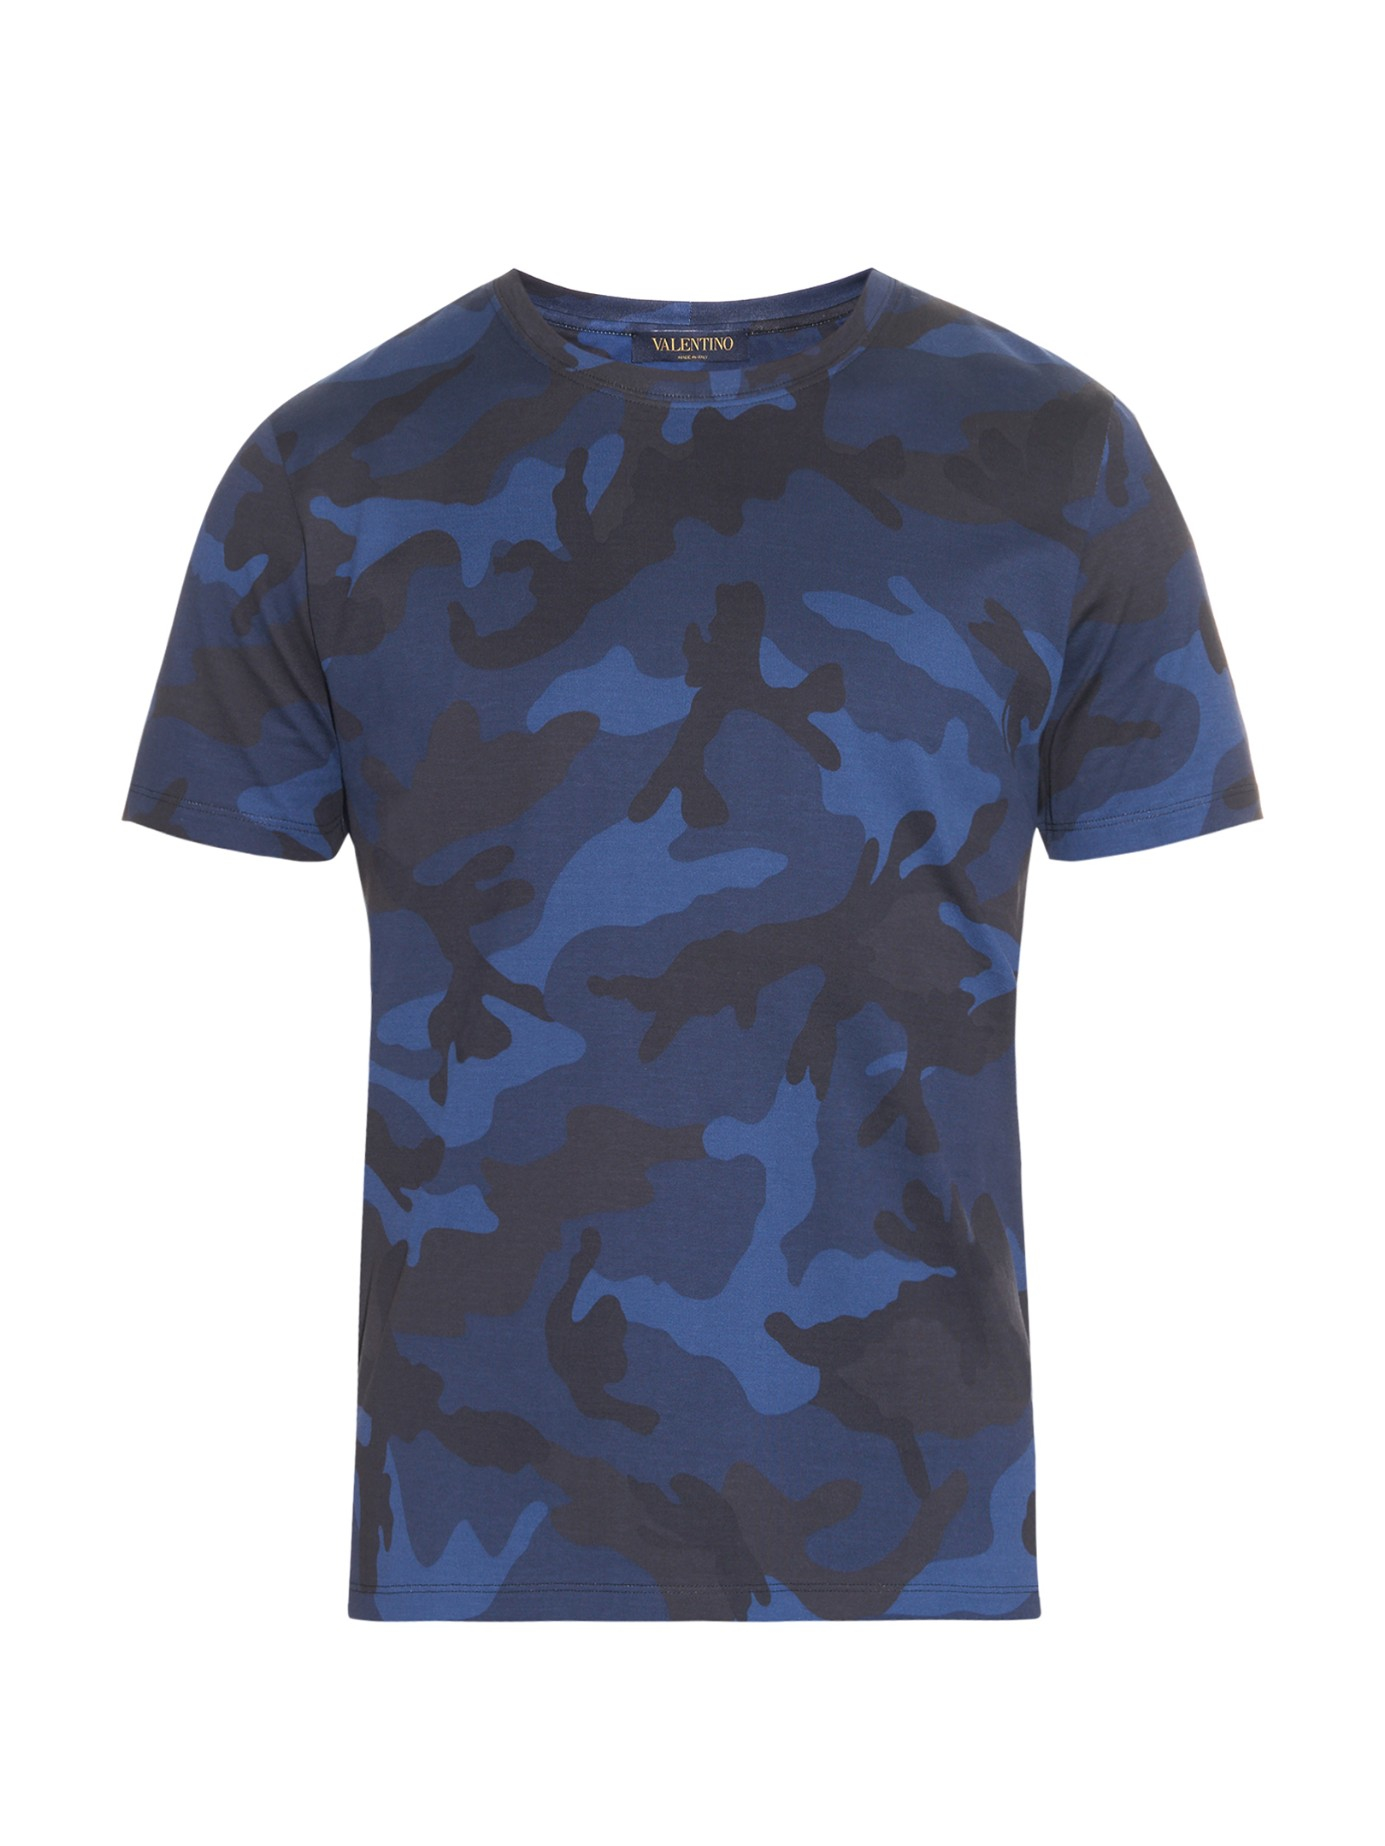 Lyst - Valentino Camouflage-Print Cotton-Jersey T-Shirt in Blue for Men